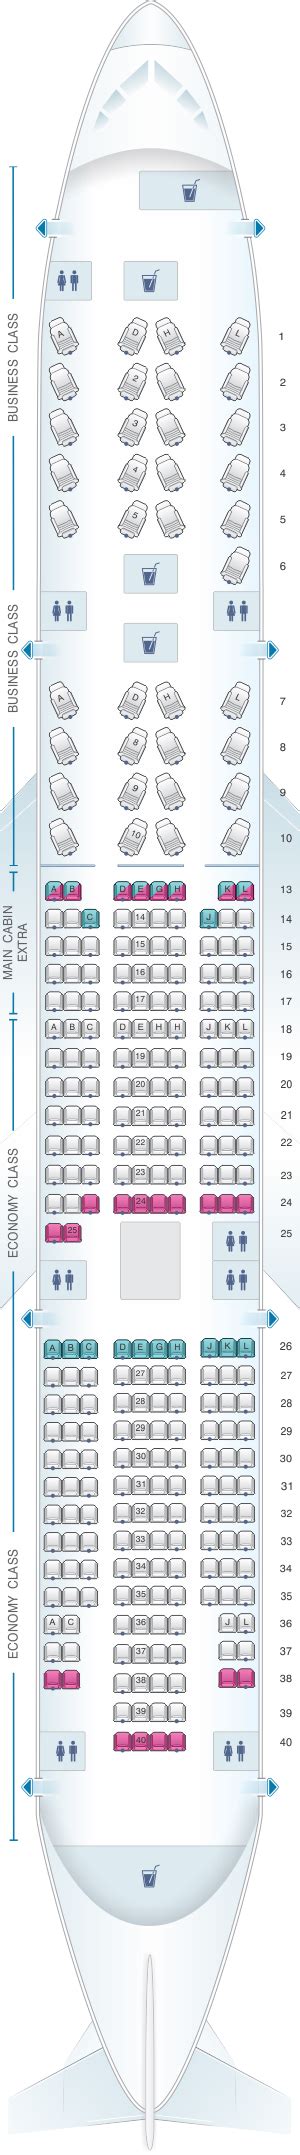 American Airlines Seat Map